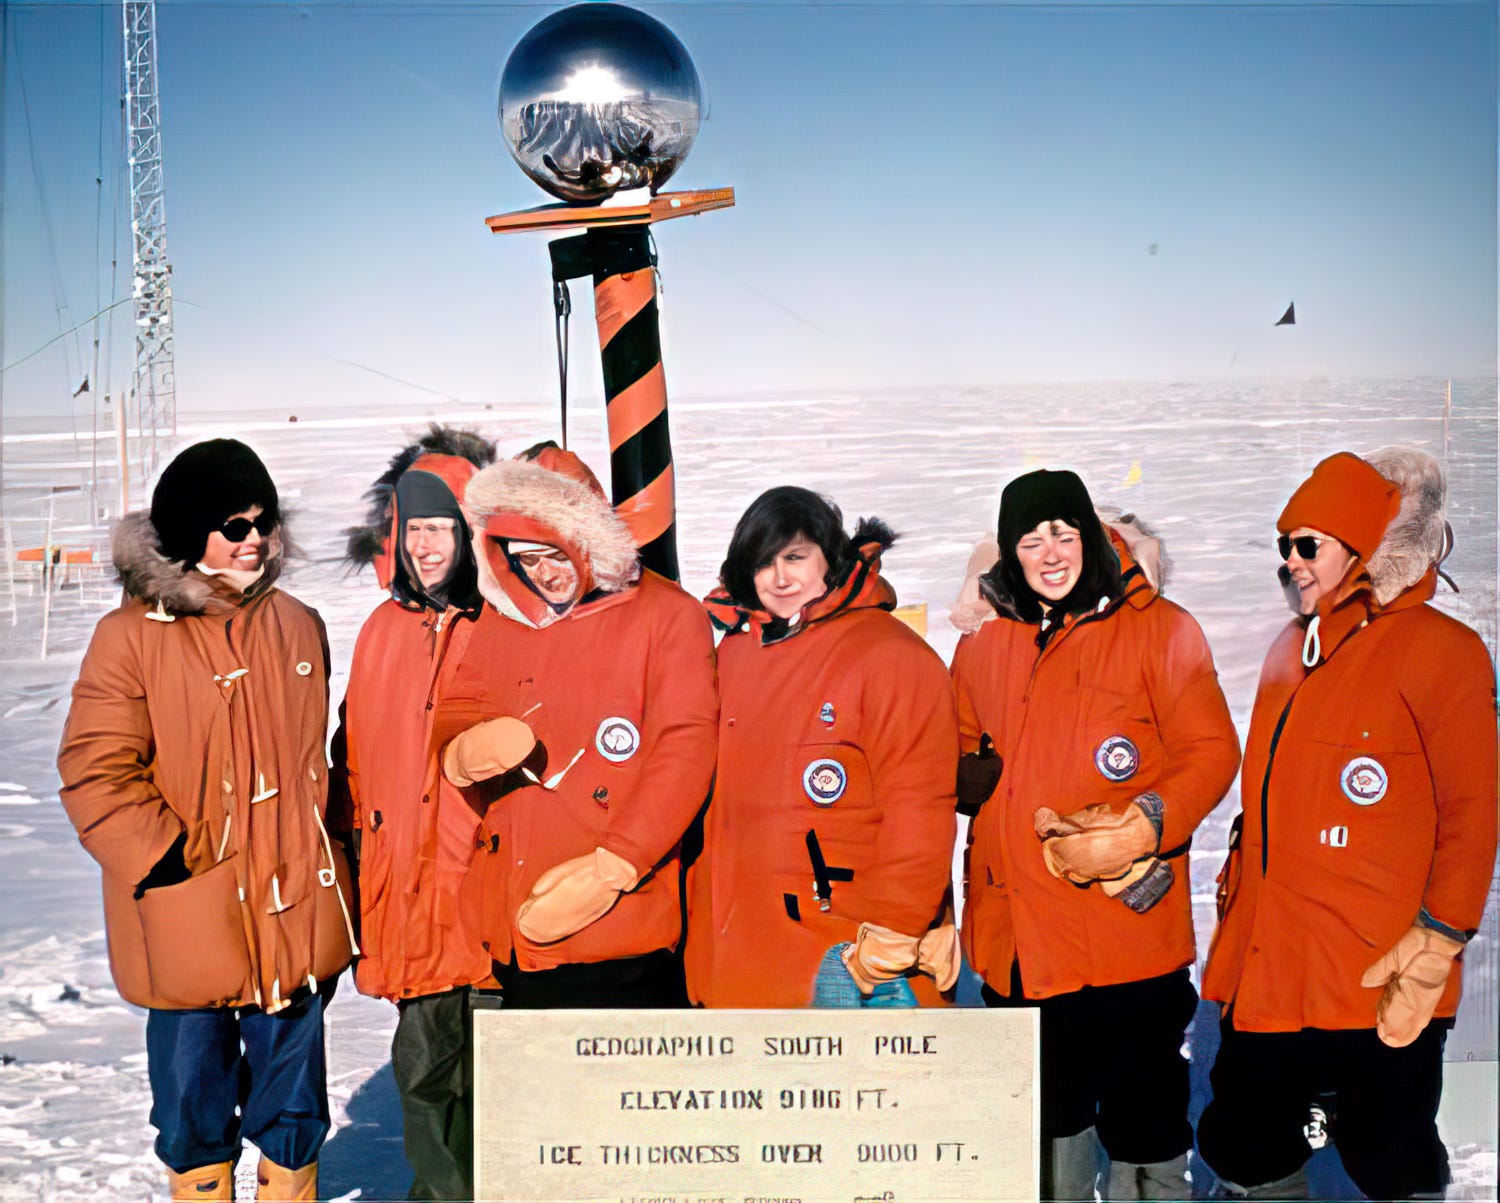 On Nov. 12, 1969, the first six women to set foot on the South Pole were, from left, Pam Young, Jean Pearson, Terry Tickhill Terrell, Lois Jones, Eileen McSaveney and Kay Lindsay.